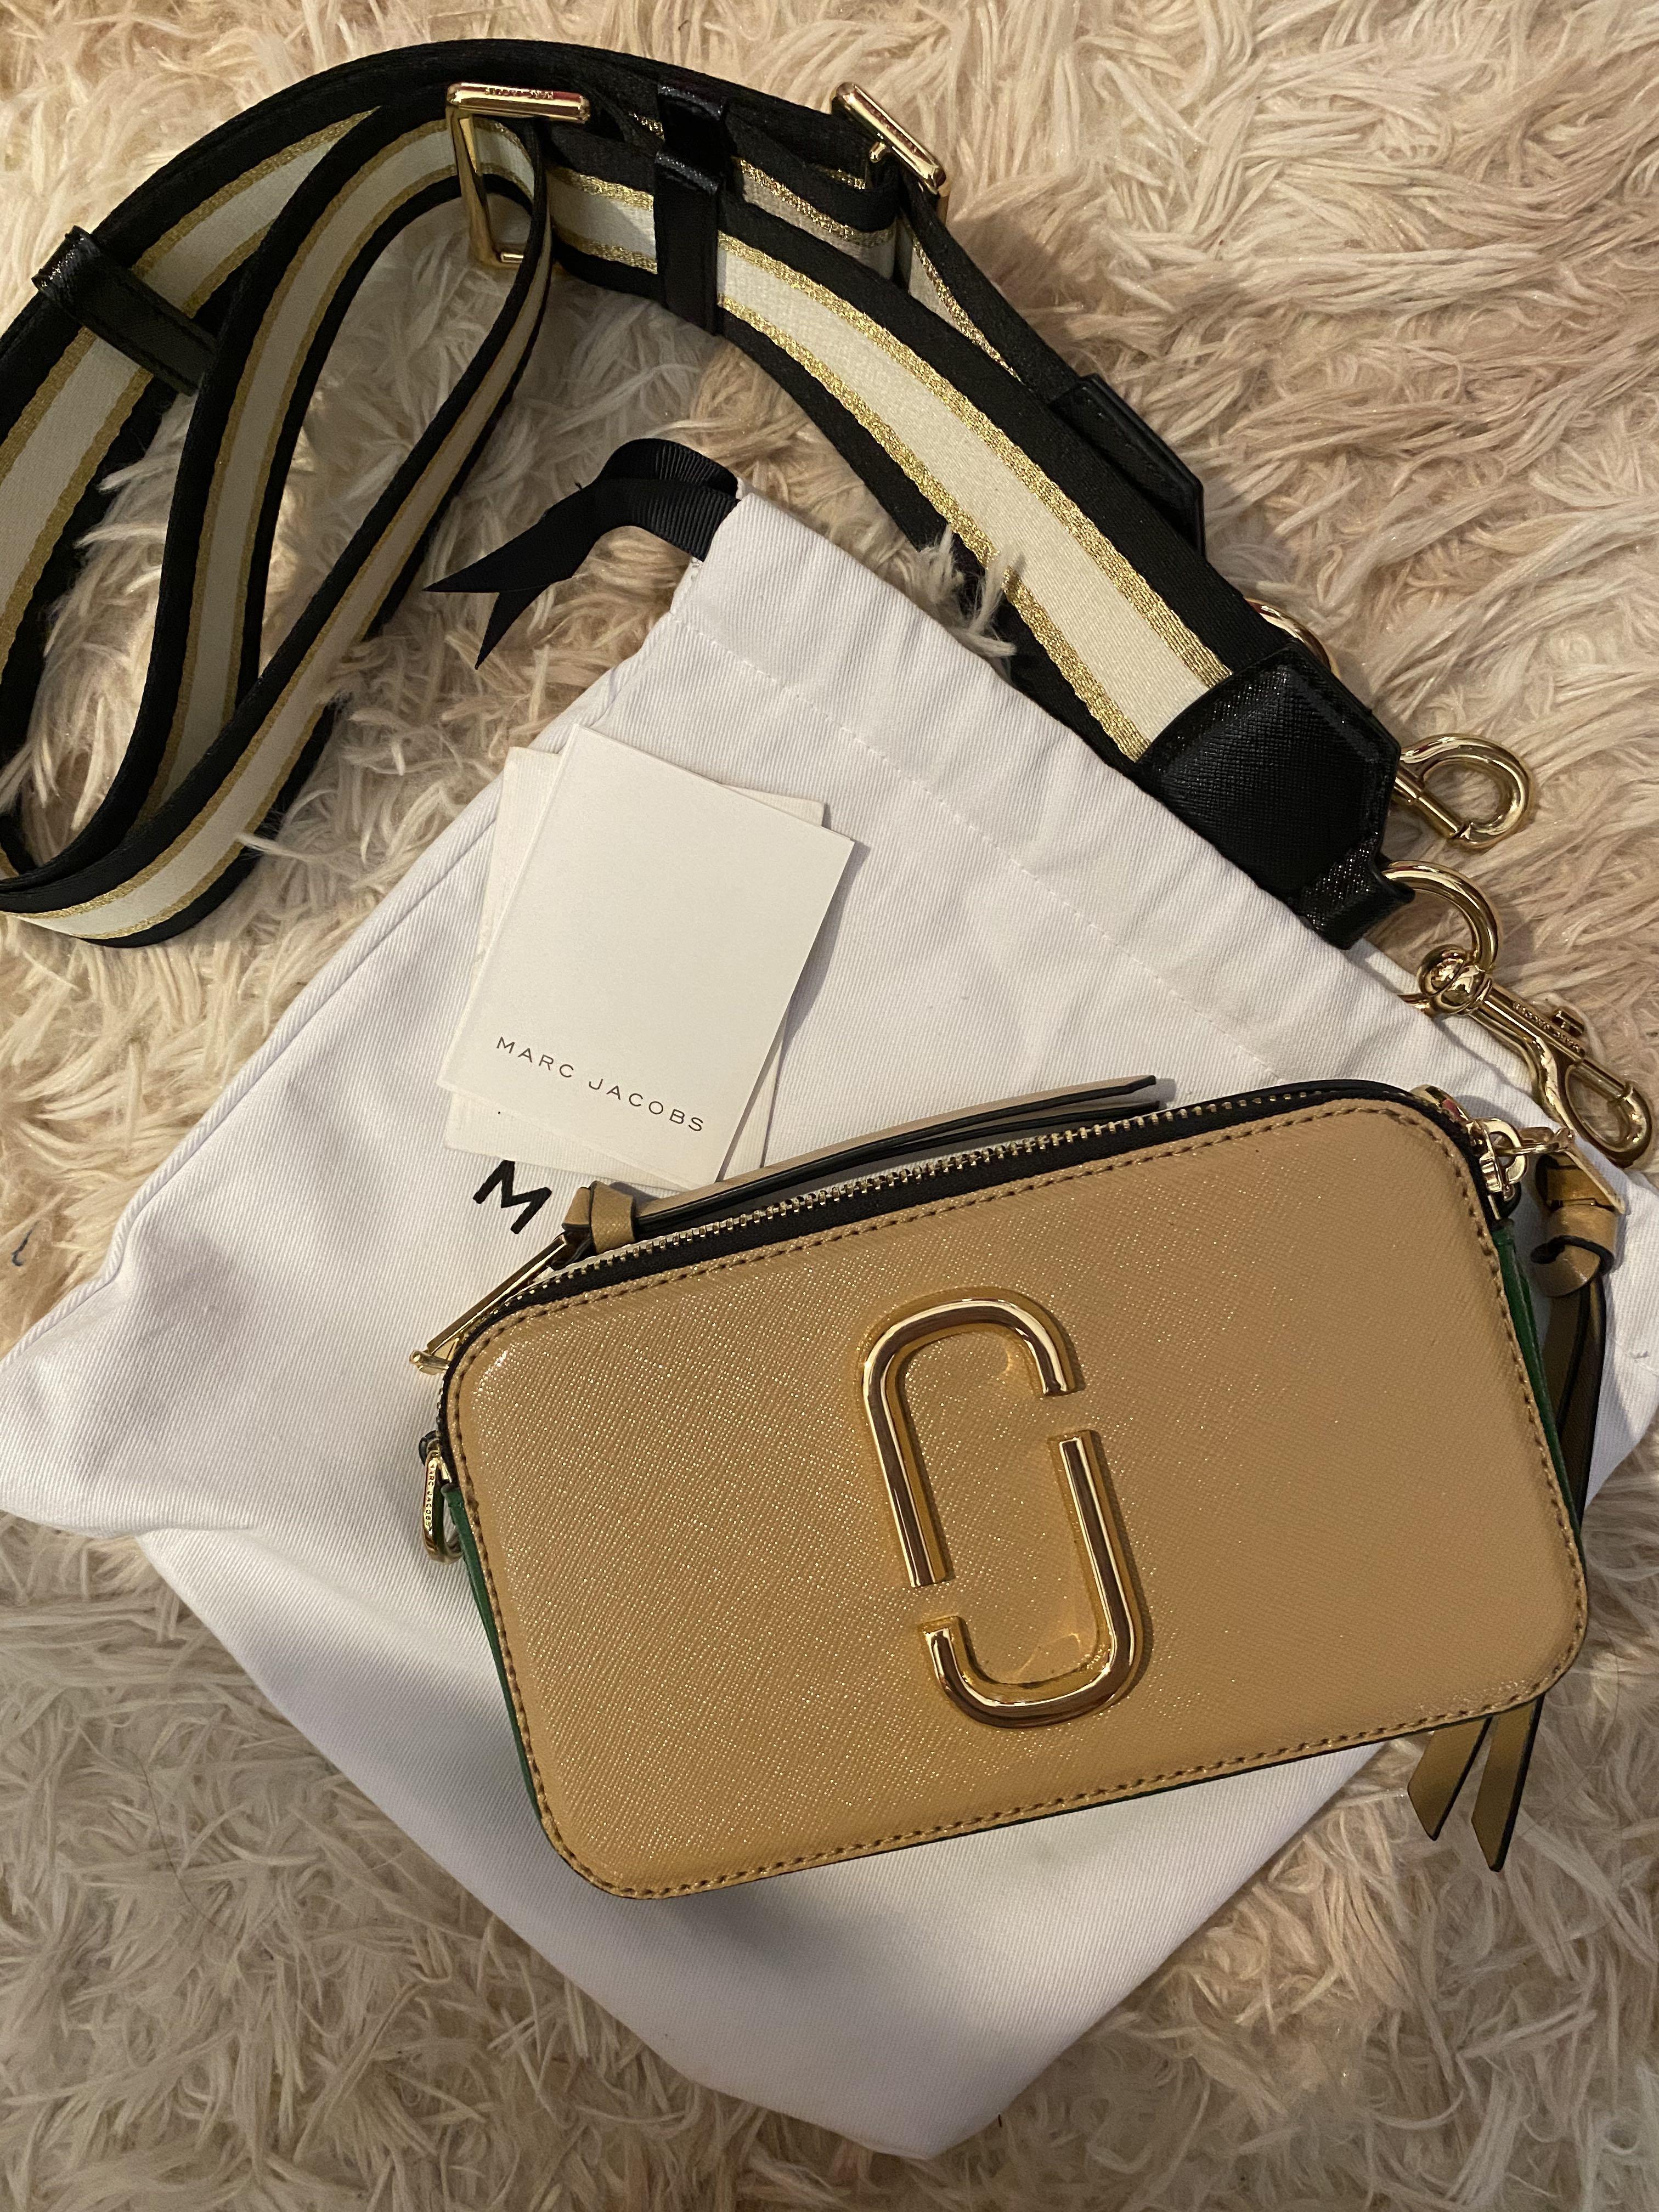 Authentic Marc Jacobs Snapshot Crossbody bag with Strap and Dust Bag